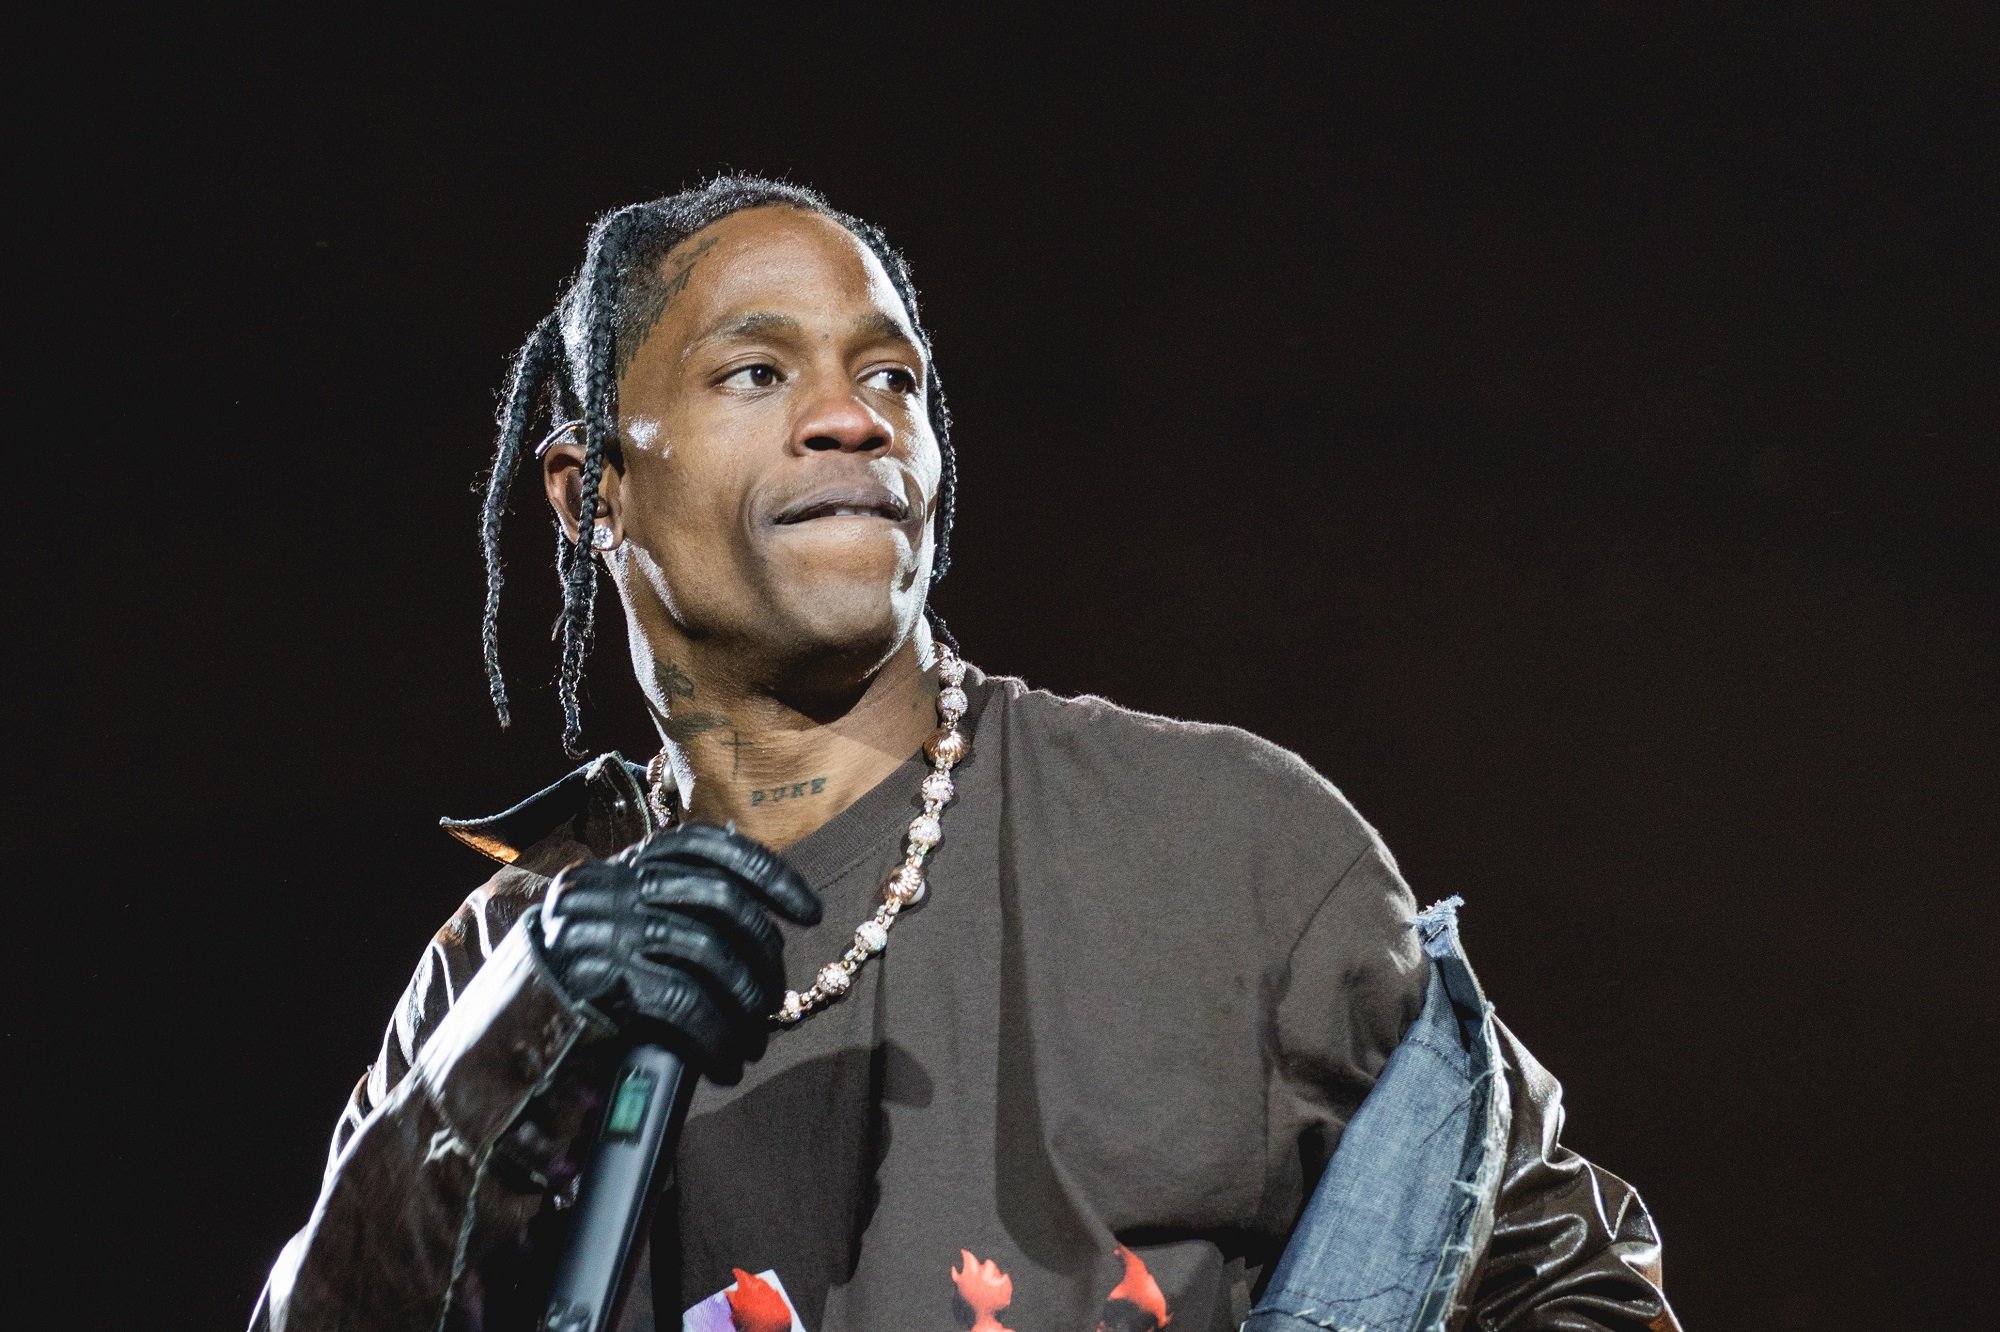 Travis Scott performs onstage during the 2021 Astroworld Festival